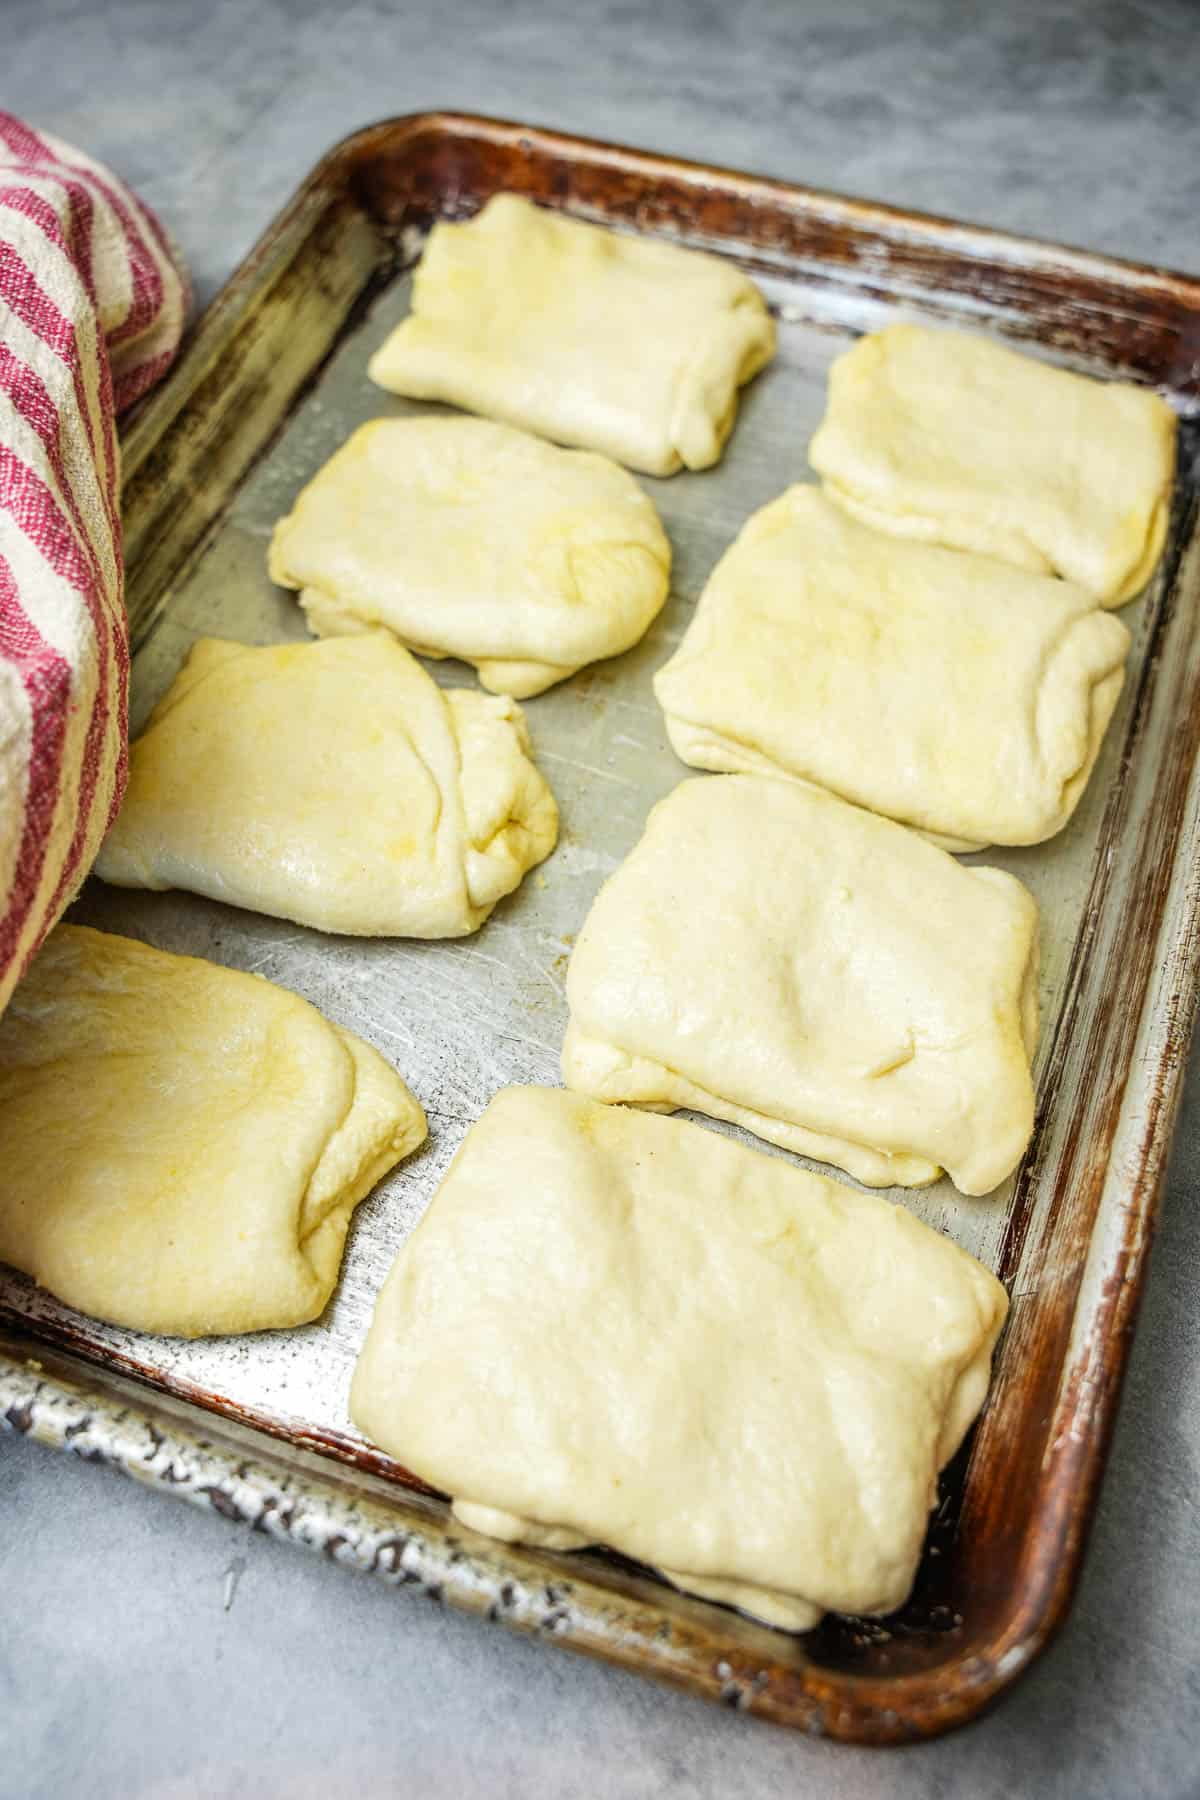 A metal sheet pan holding 8 prepared, layered portions of dough waiting to be cooked.